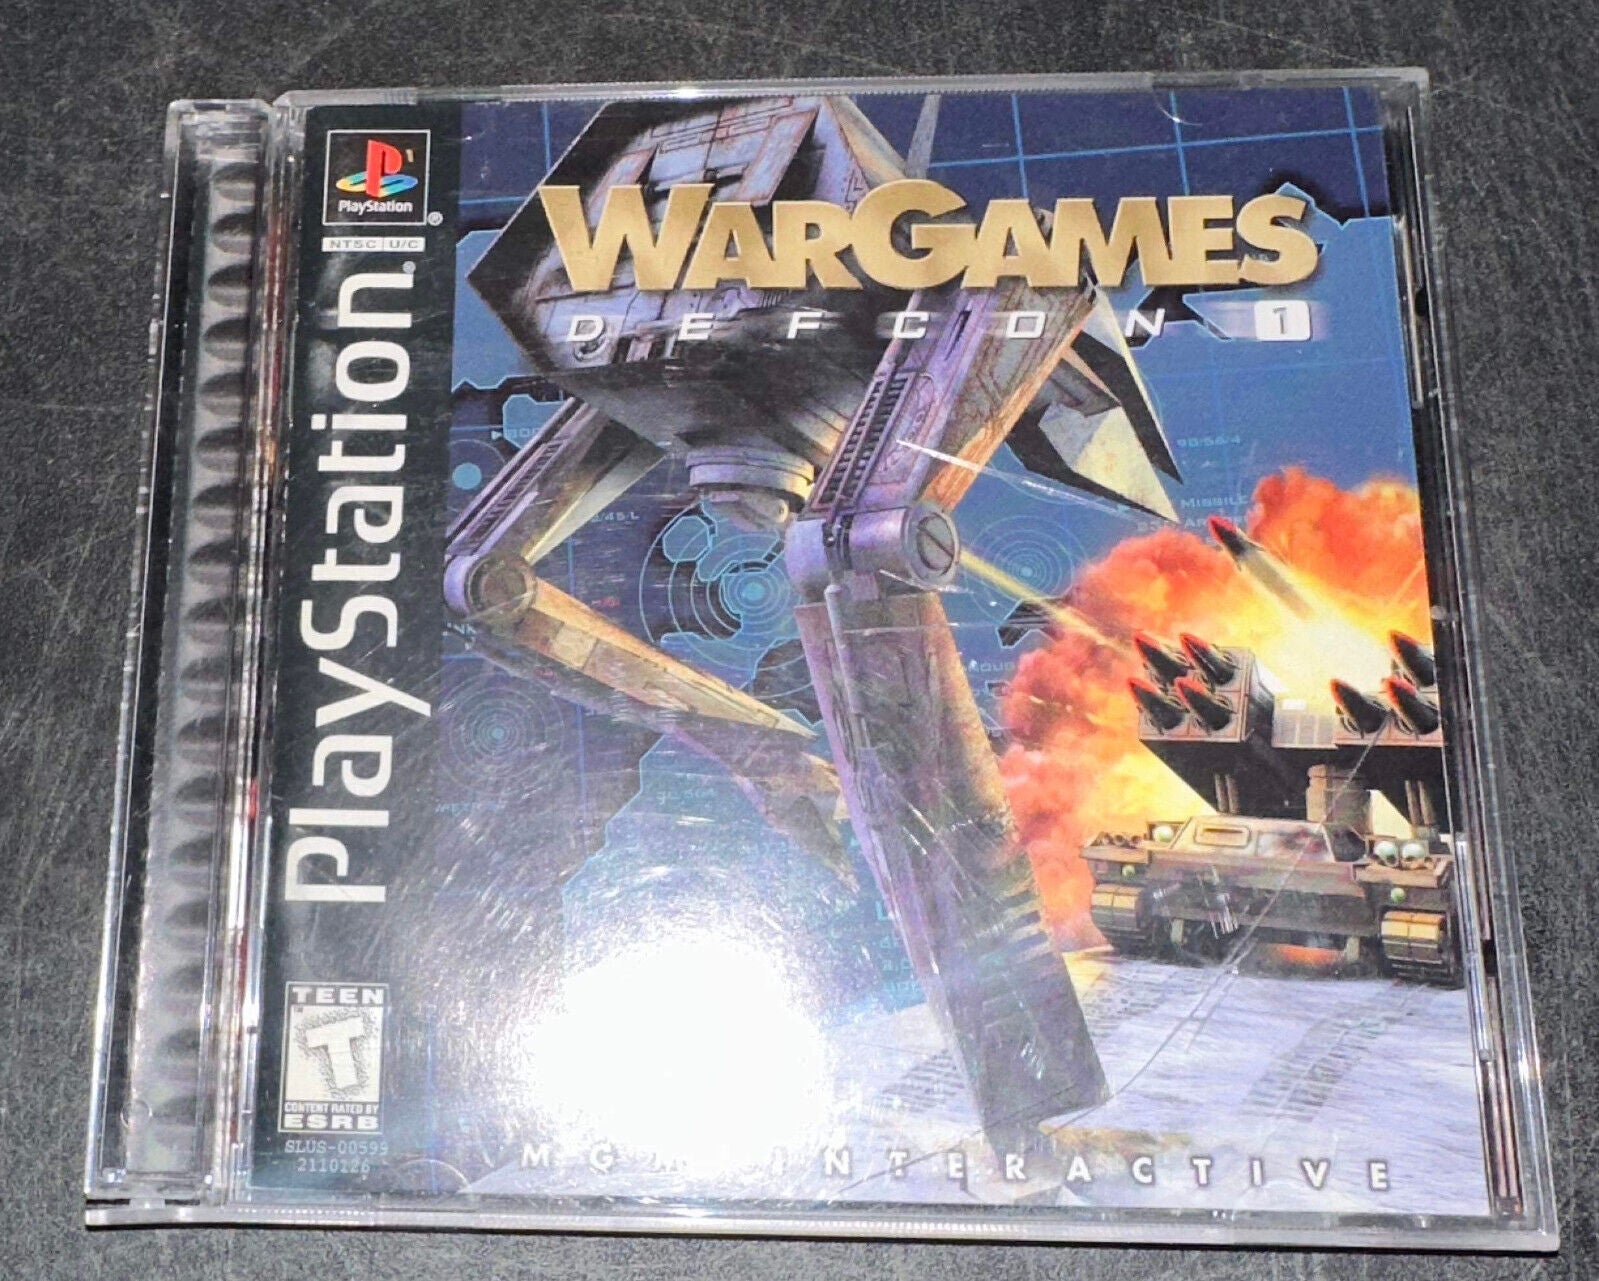 Wargames Defcon 1 (Sony PlayStation PS1) - Tested